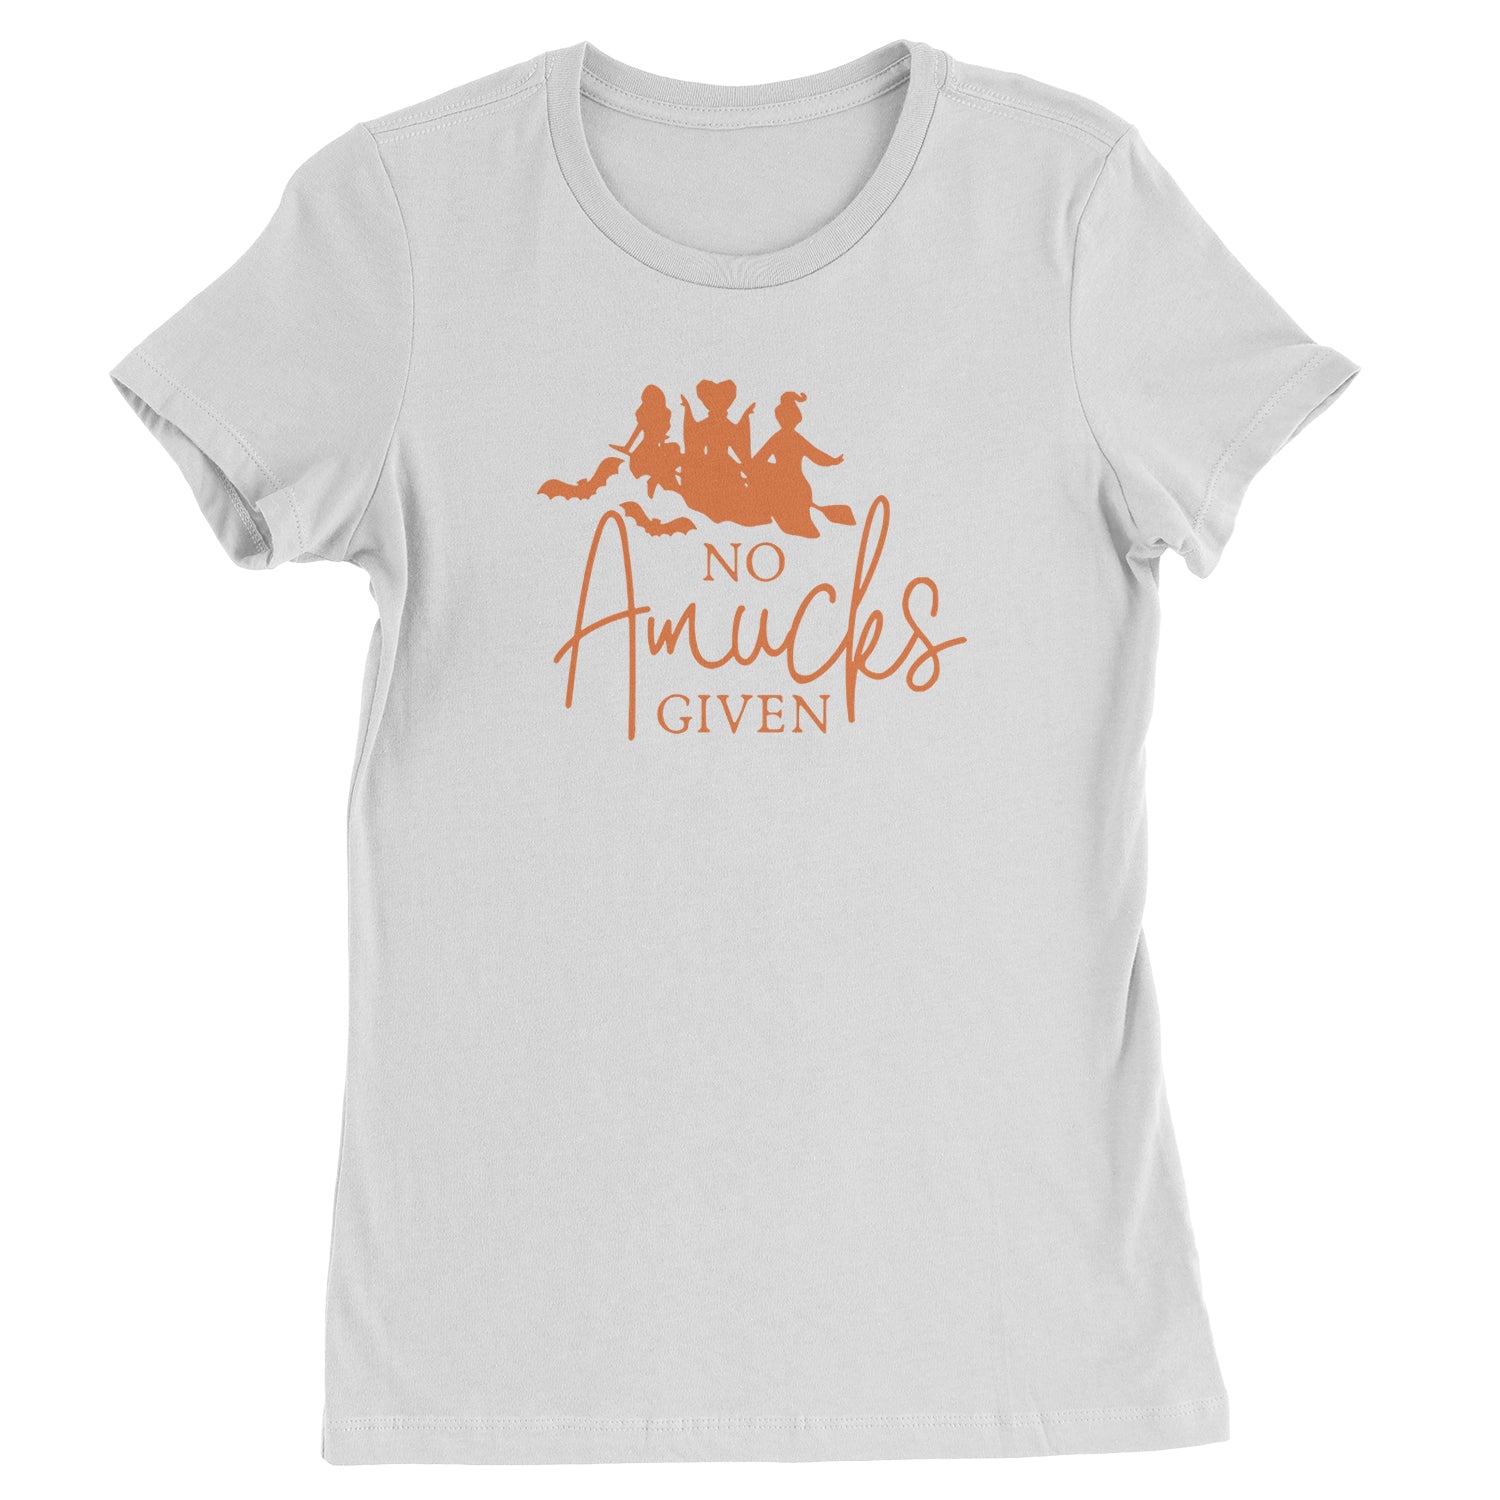 No Amucks Given Hocus Pocus Womens T-shirt descendants, enchanted, eve, hallows, hocus, or, pocus, sanderson, sisters, treat, trick, witches by Expression Tees